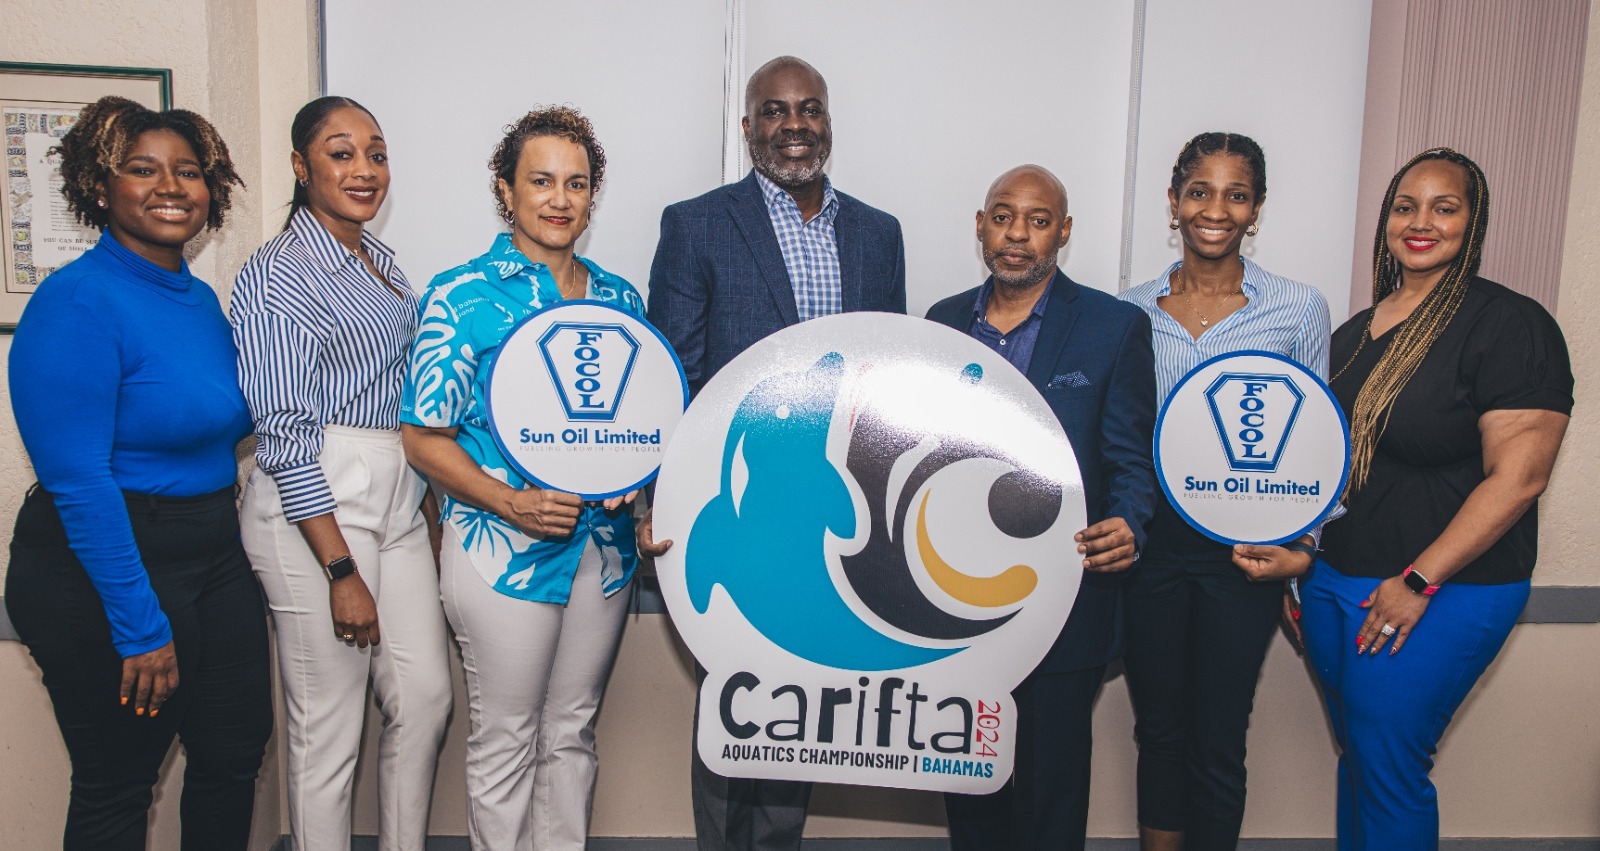 Clinton Rolle, Managing Director and General Manager, FOCOL Sun Oil and Fabian Fernander, Sun Oil Sales and Marketing Manager are pictured with members of the CARIFTA Aquatics 2024 Marketing Team.